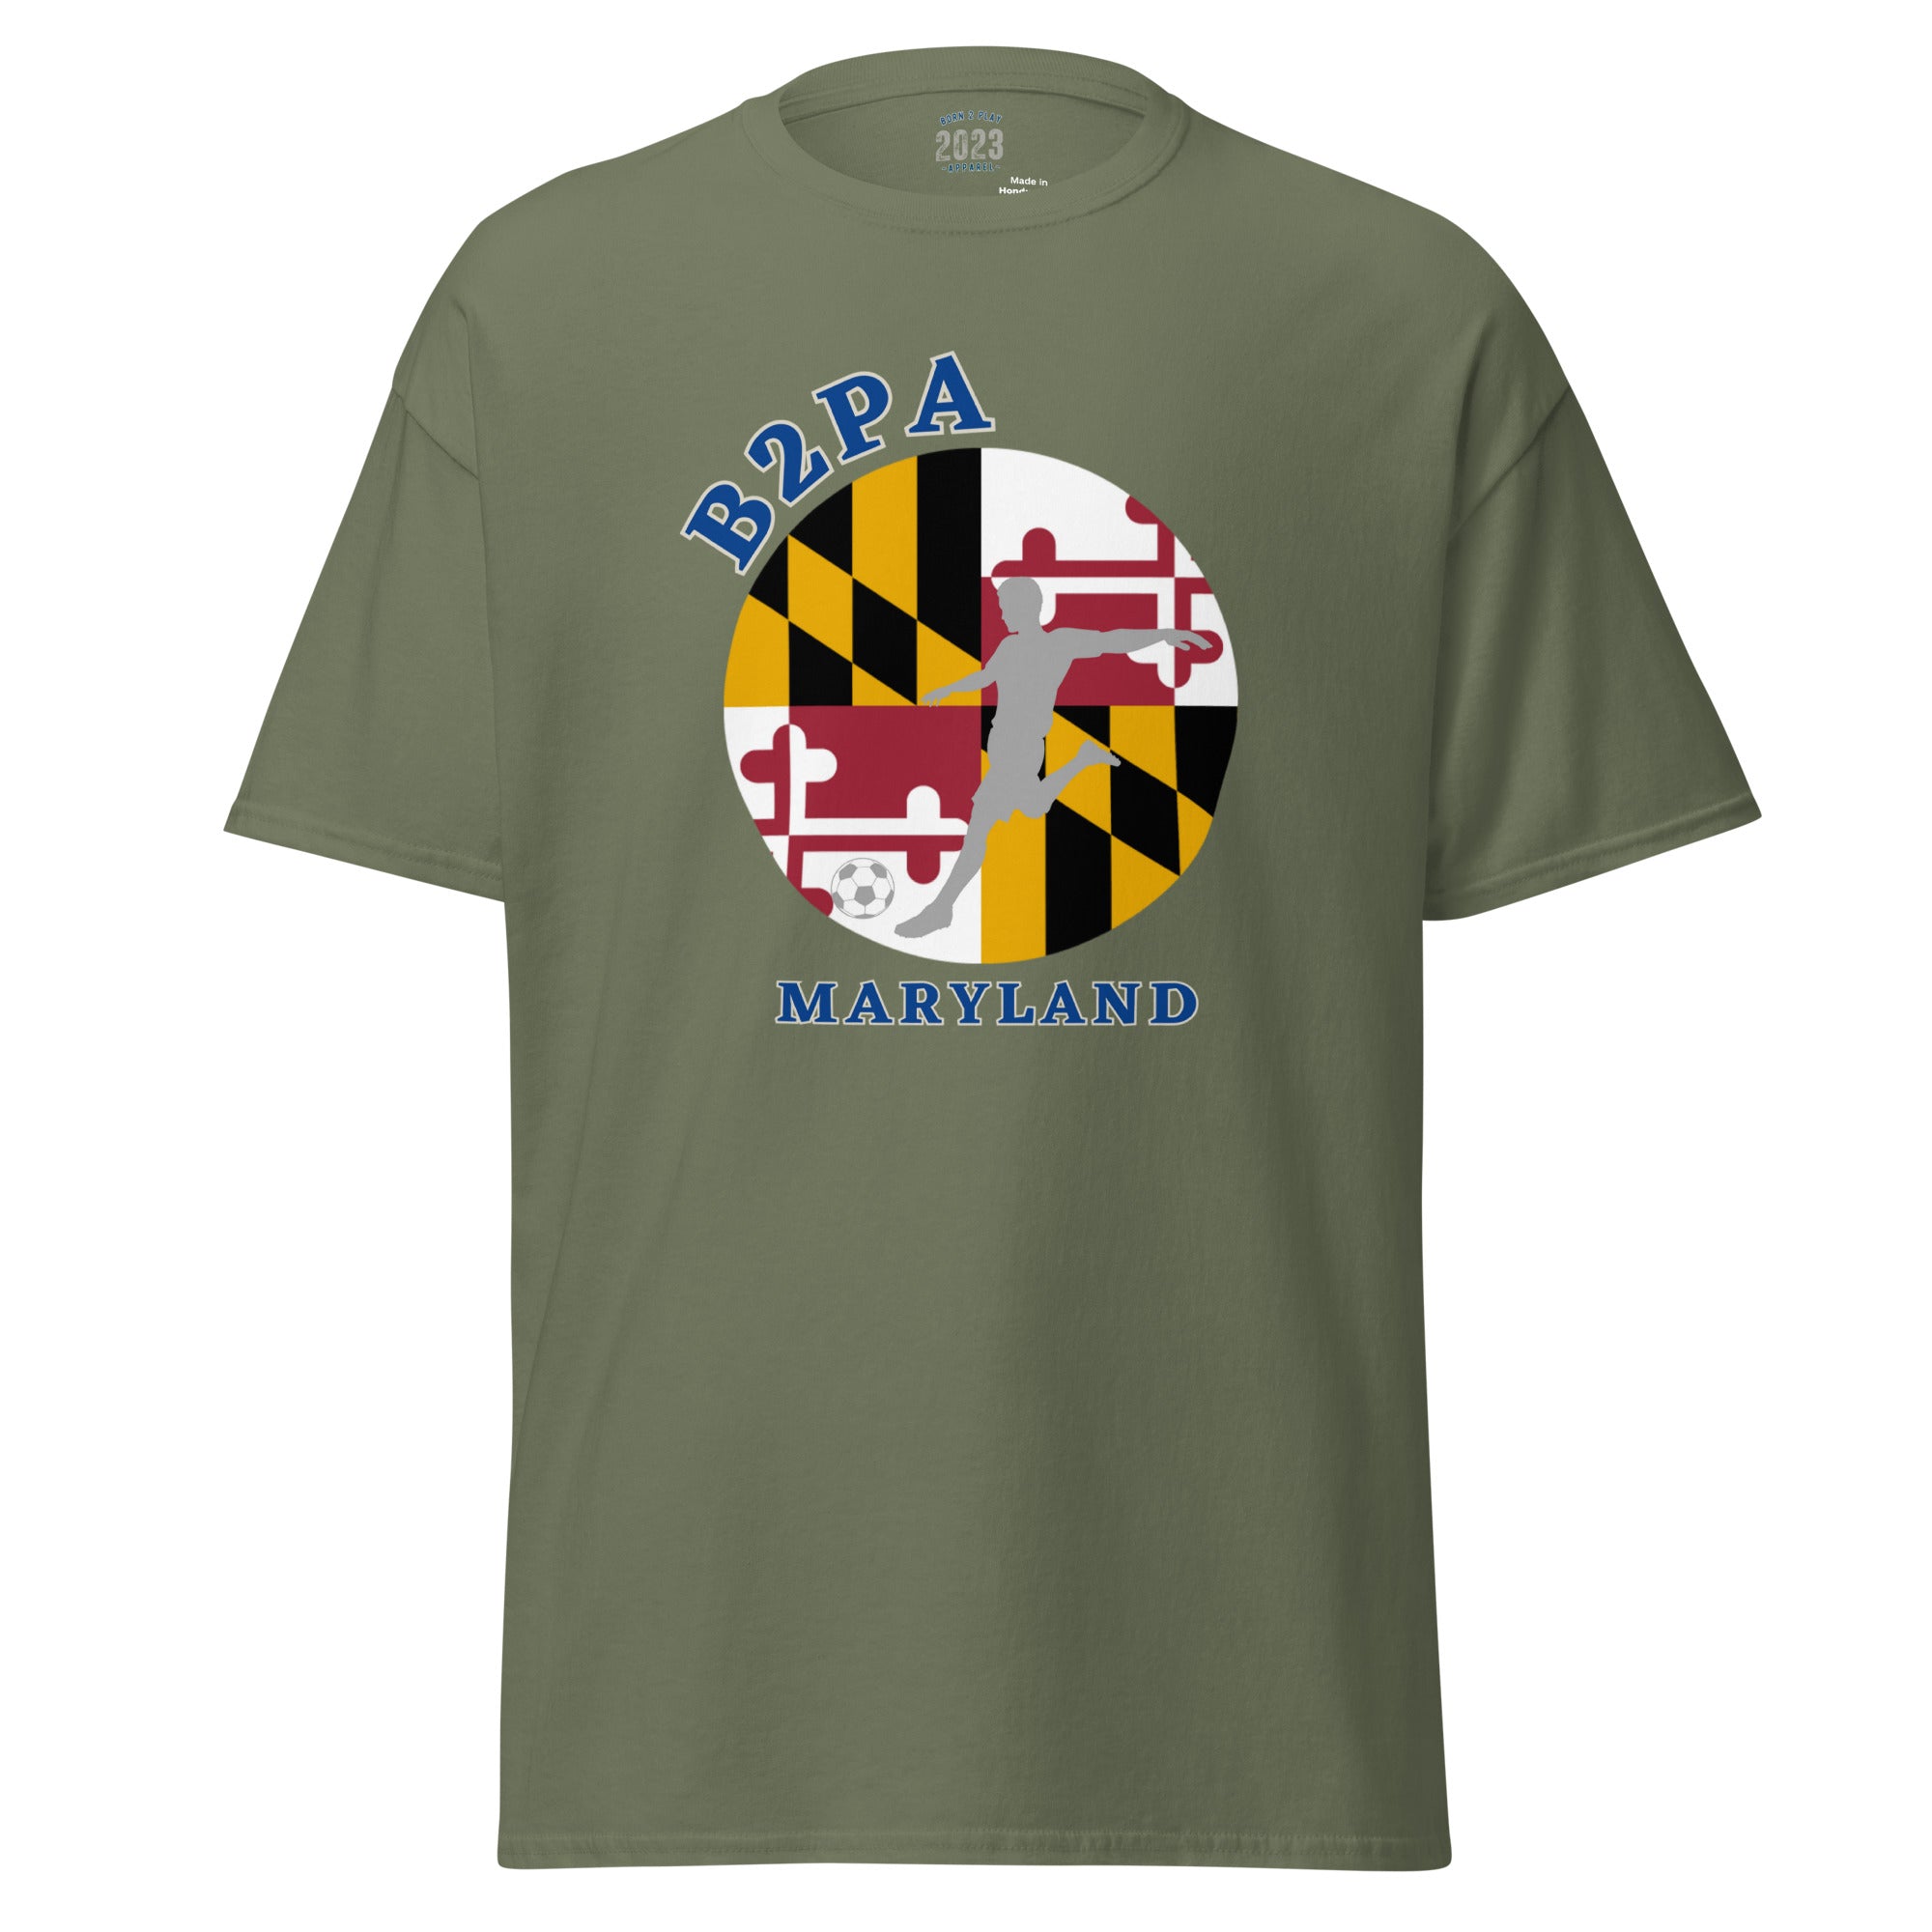 Maryland Bends it Better